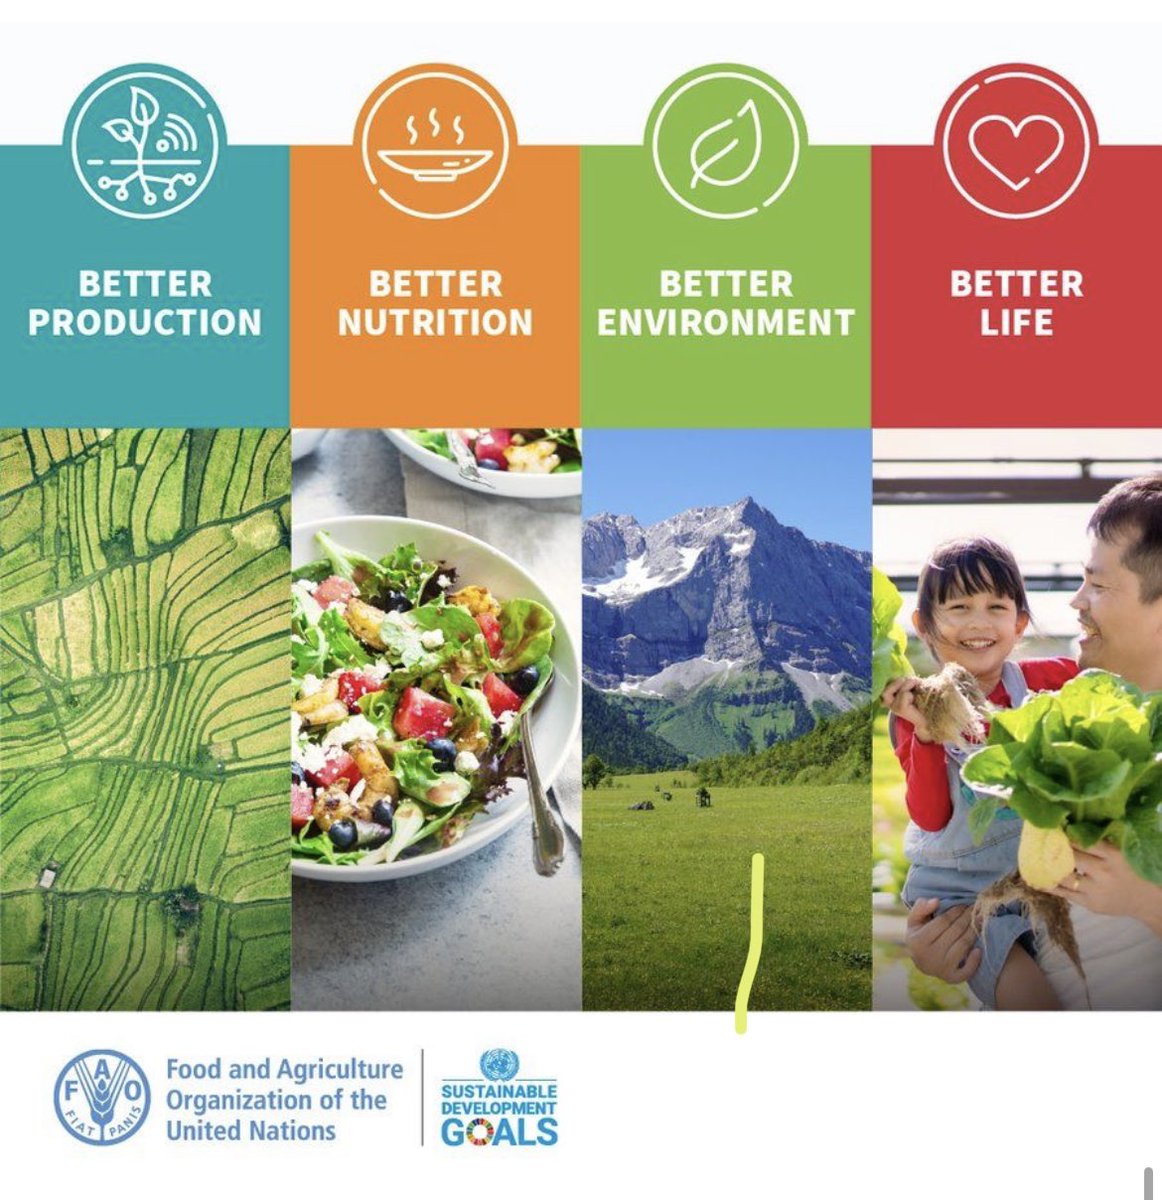 FAO Sustainable Development Goals  #4Betters 

#BetterProduction
#BetterNutrition
#BetterEnvironment
#BetterLife
Let’s work together & strengthen our food security. 
A sustainable & food secure nation is possible if we work together 
leaving no one behind
@presidencymv 
@MoEDmv